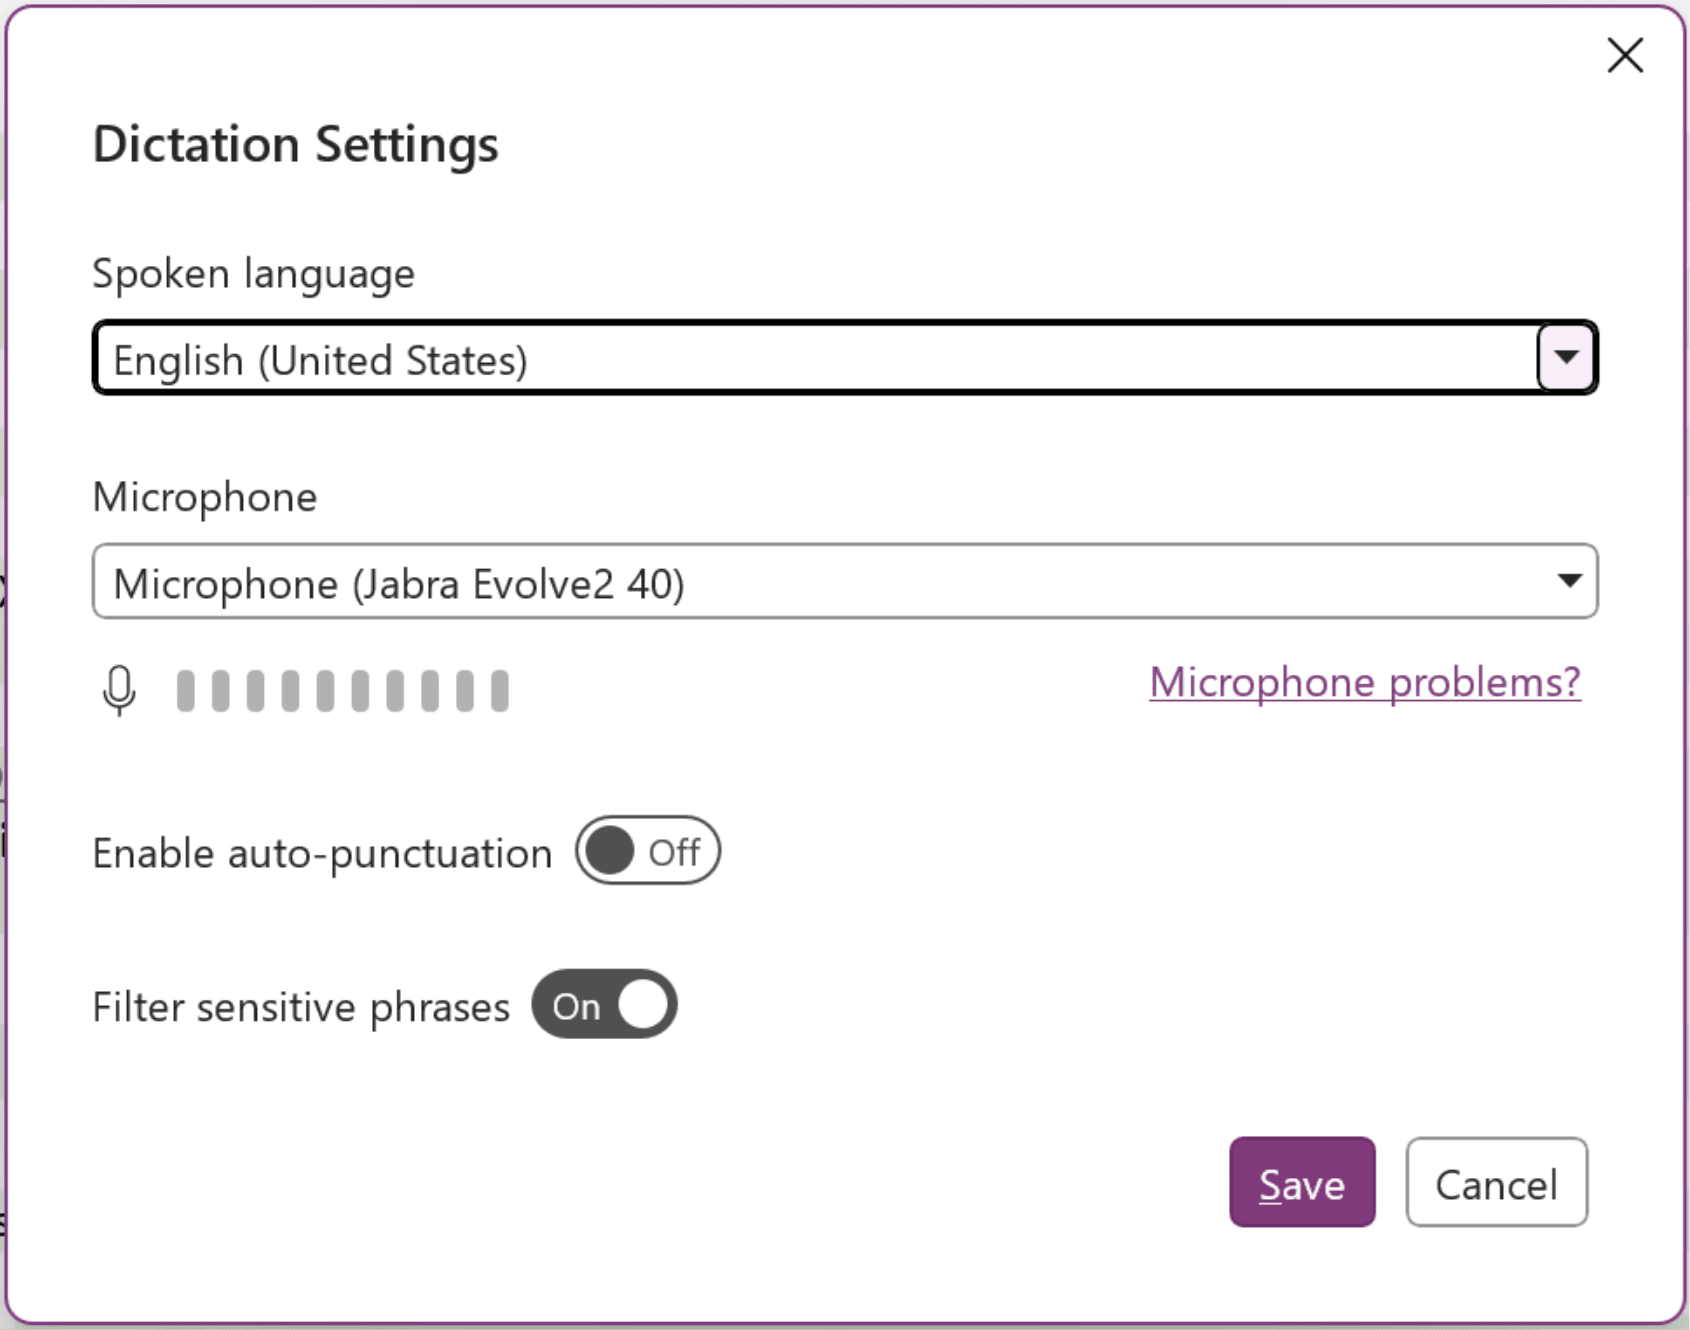 Dictation Setting dialog box in OneNote for Windows